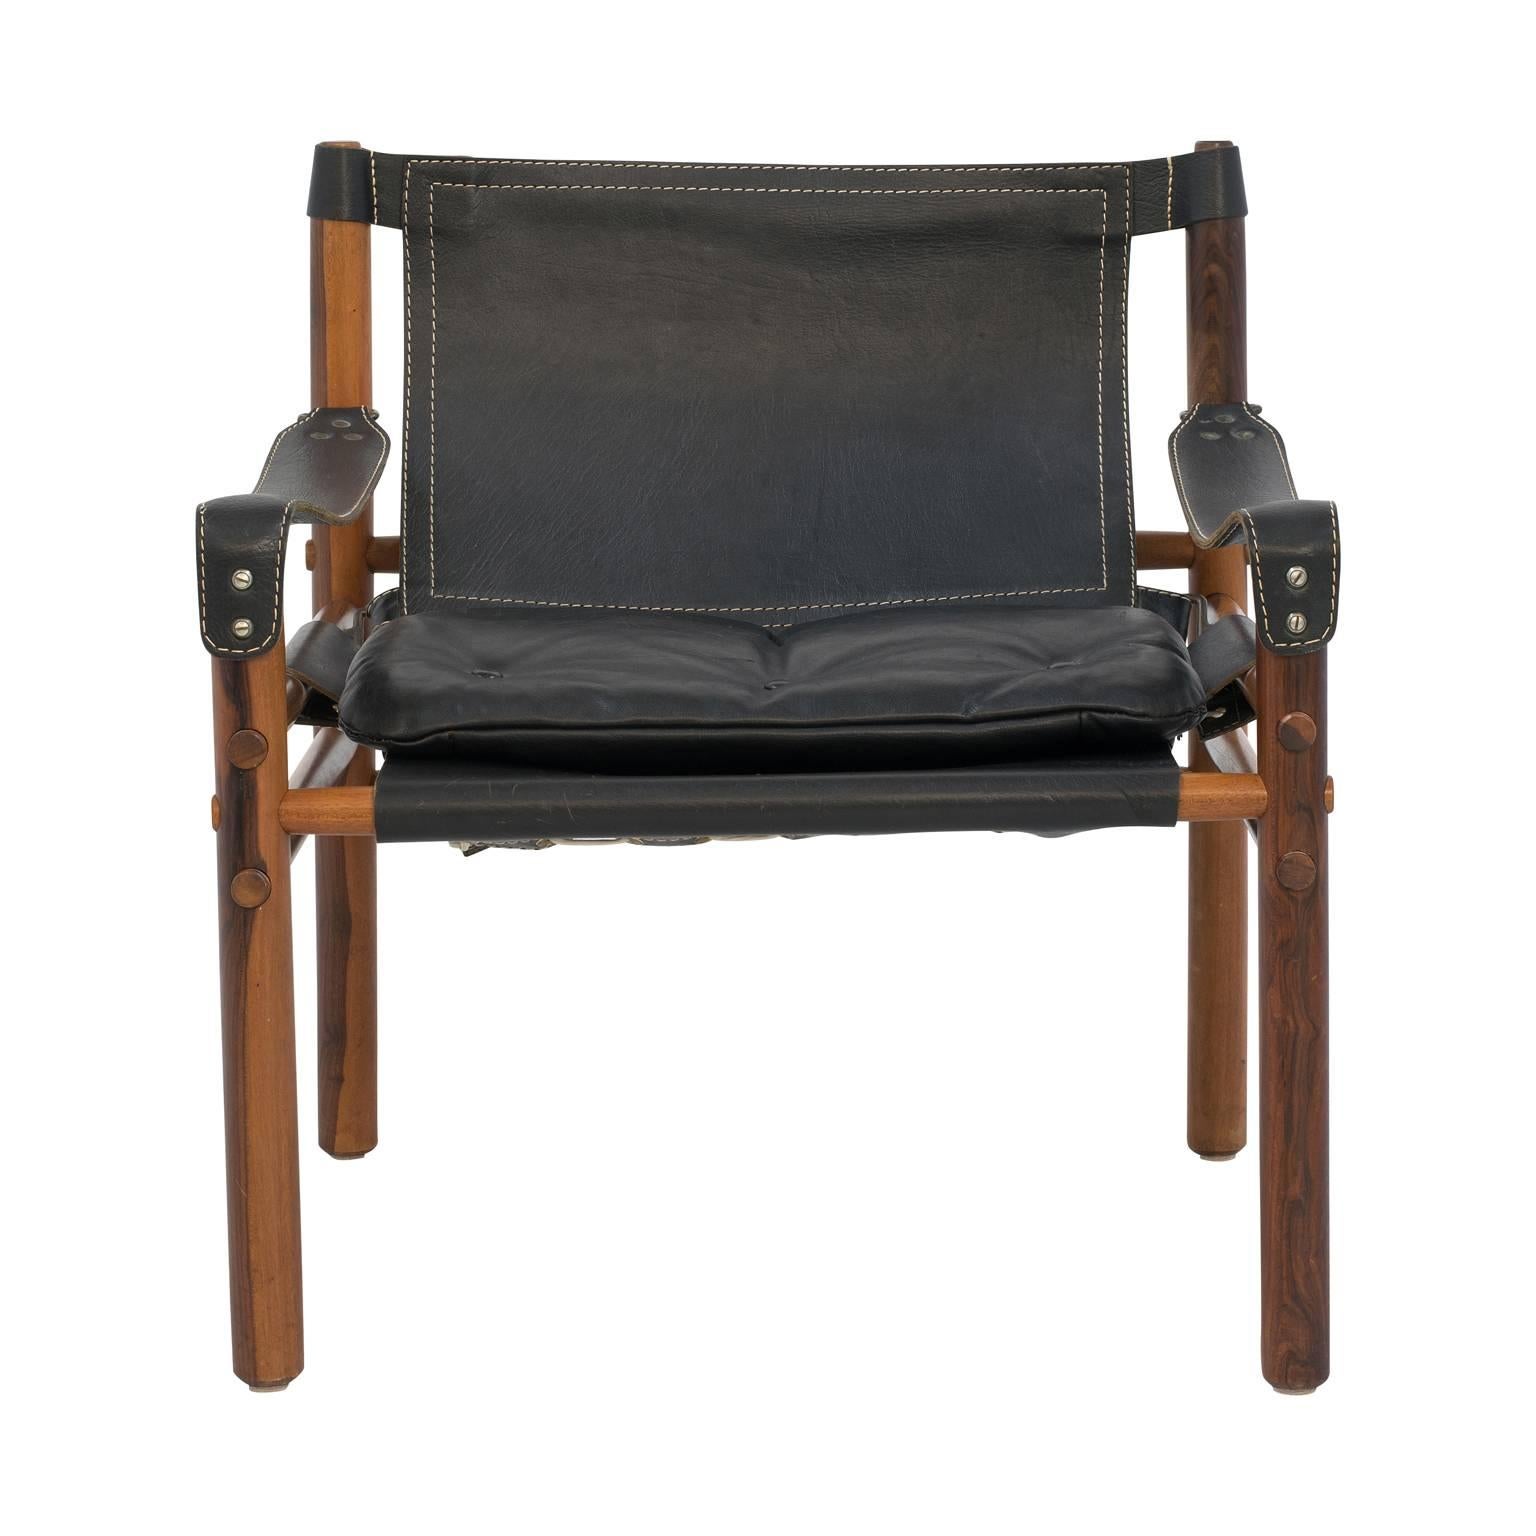 Fabulous Sirocco safari chair by the Swedish designer Arne Norell Sirocco in rosewood and original black leather. The chair has a beautiful rustic modern vibe: rugged black leather with white over-stiching on a rosewood frame. Norell’s Sirocco chair